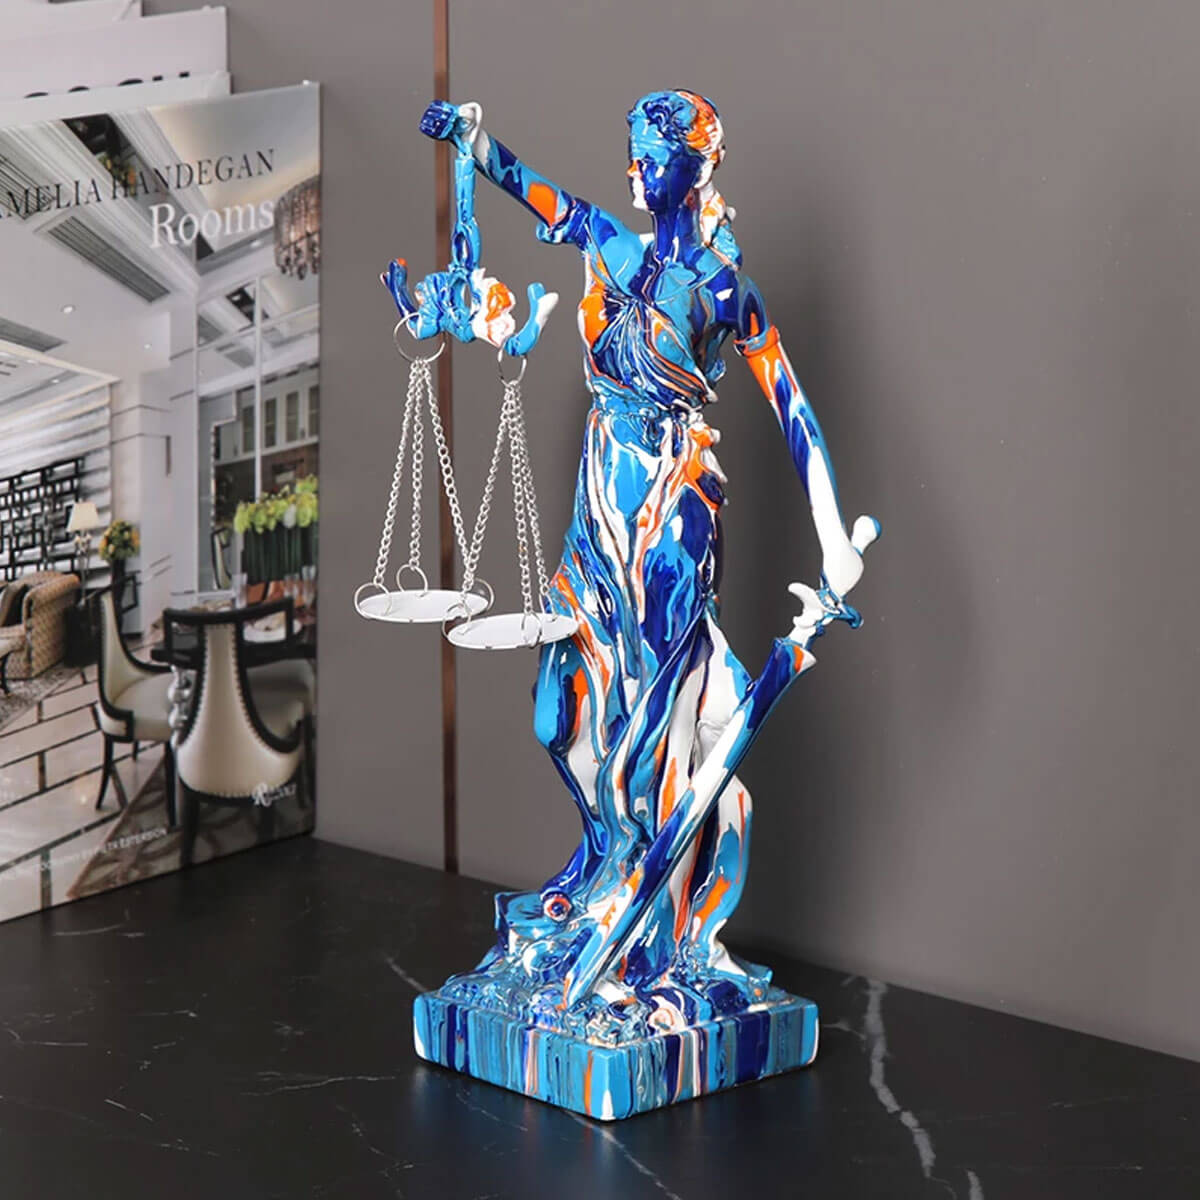 Celestial Lawkeeper Sculpture